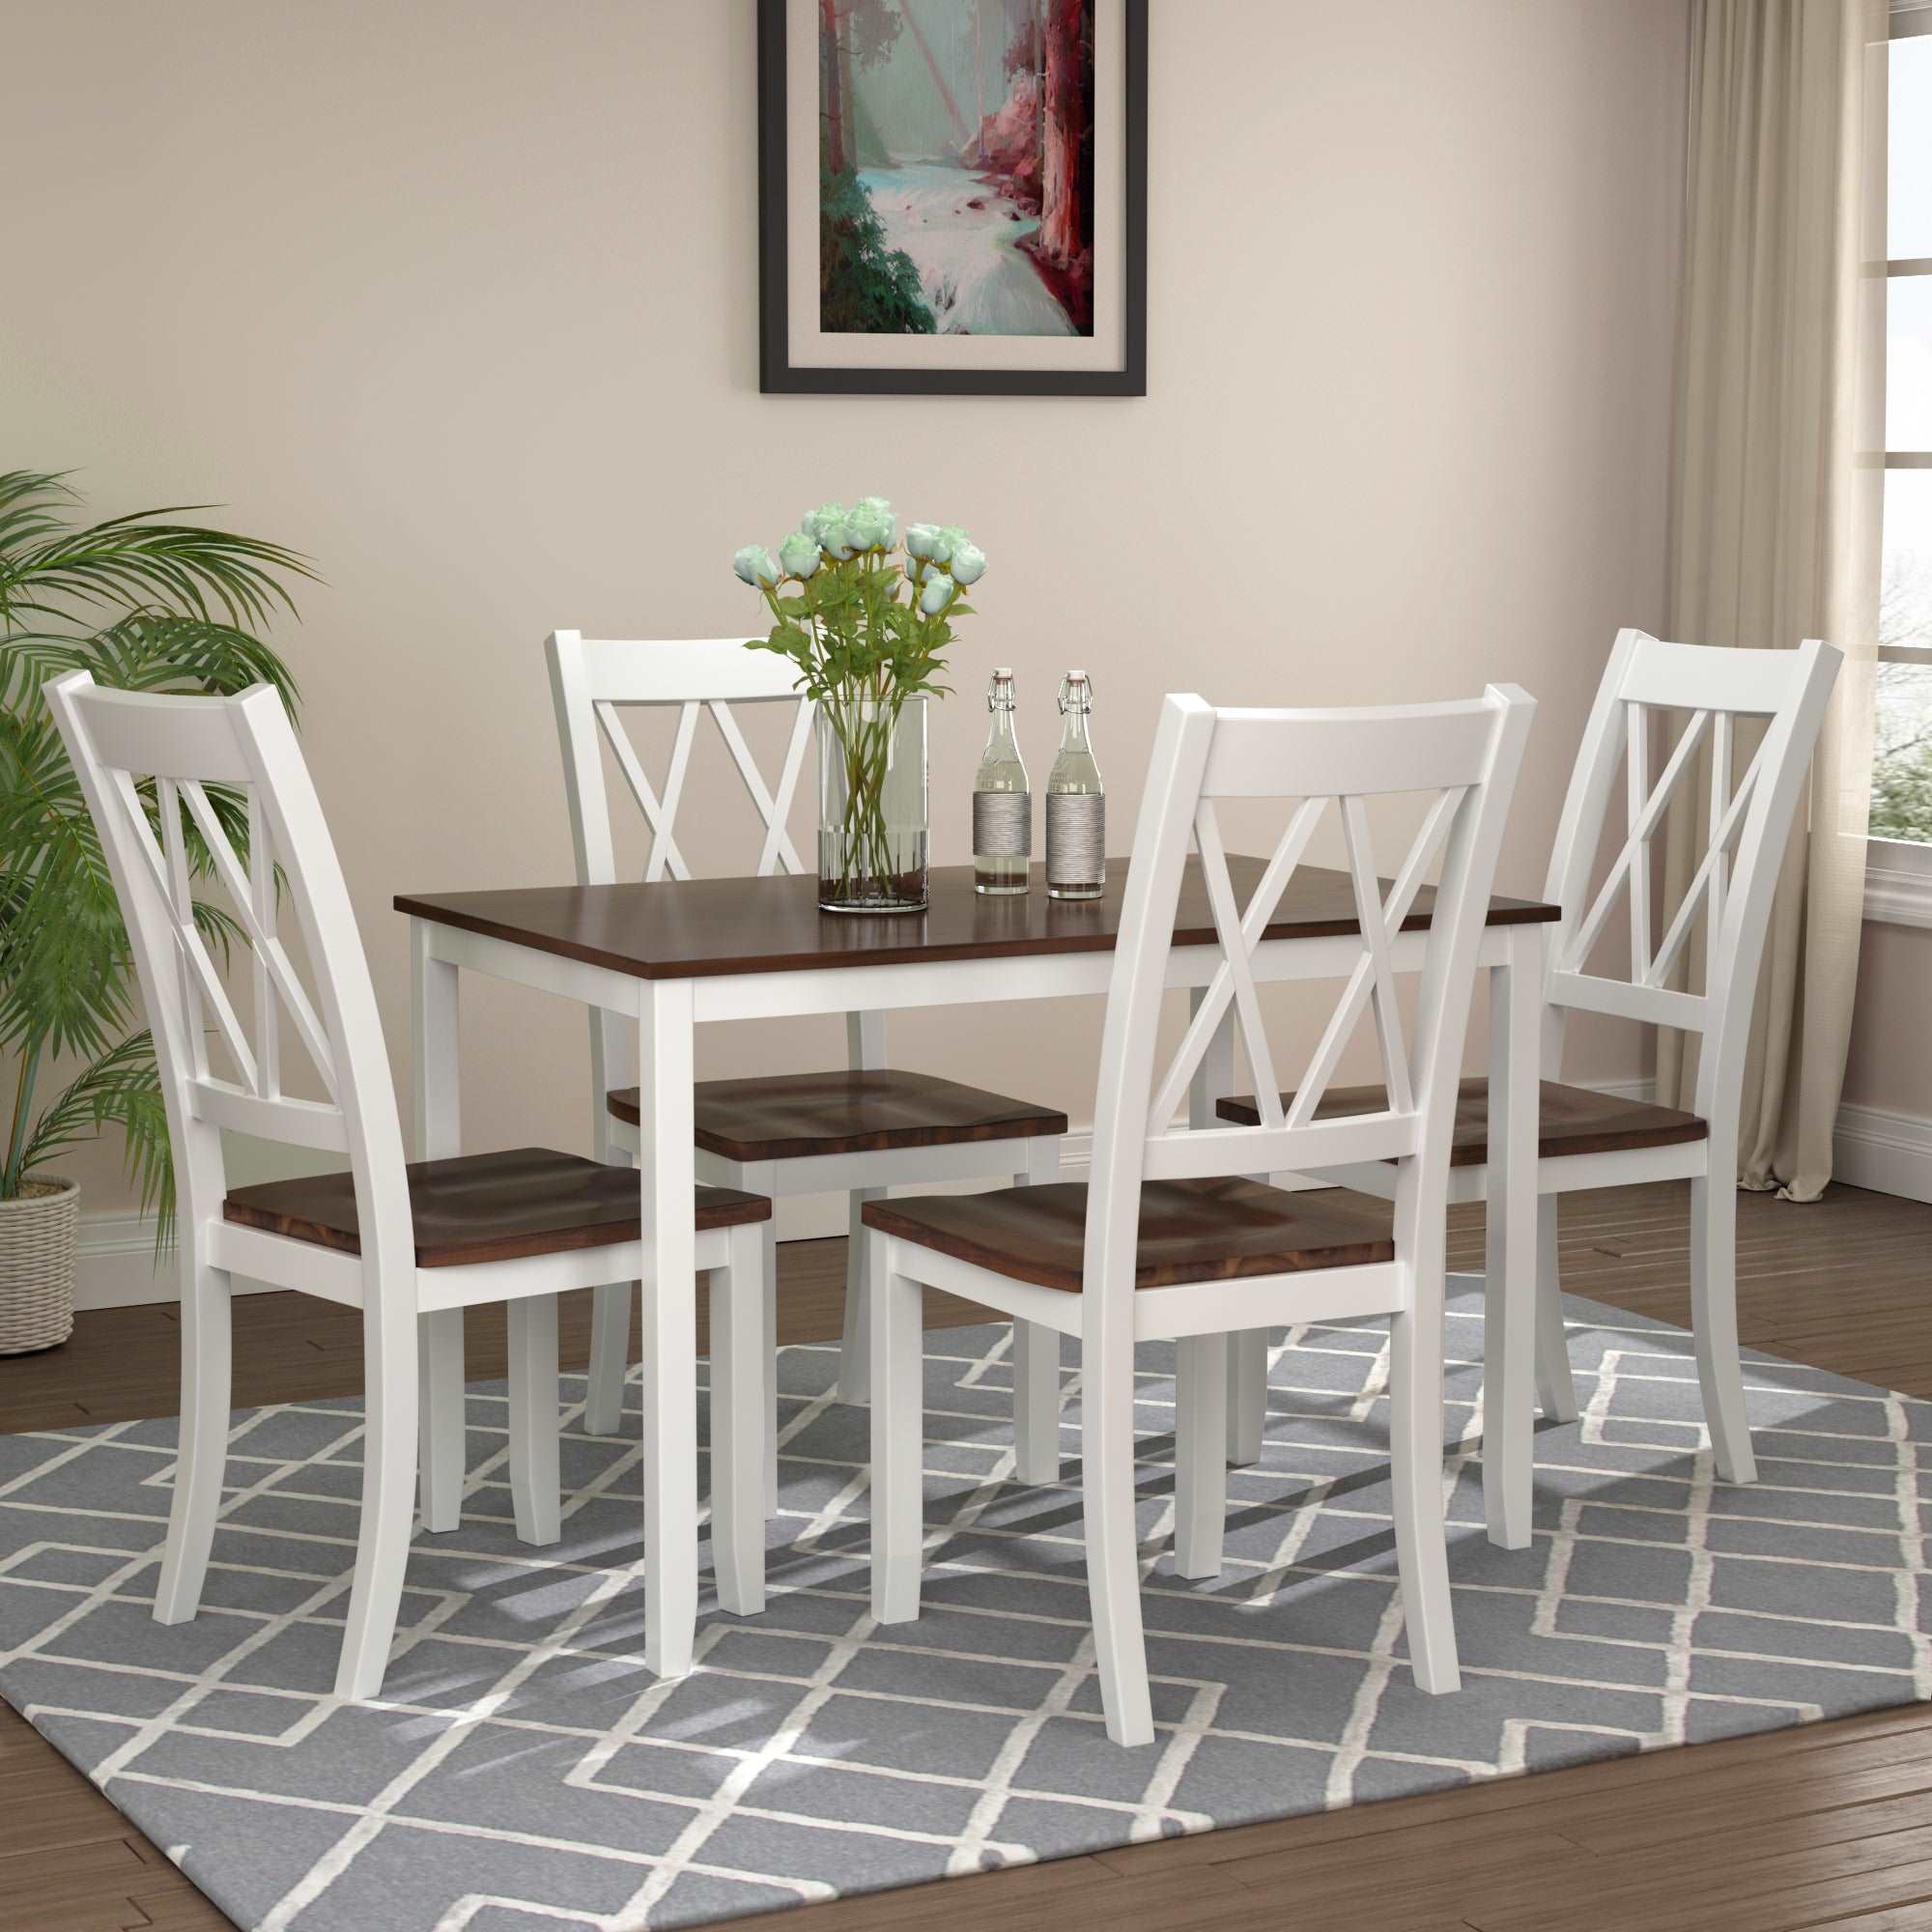 Bellemave 5-Piece Dining Table Set Home Kitchen Table and Chairs Wood Dining Set